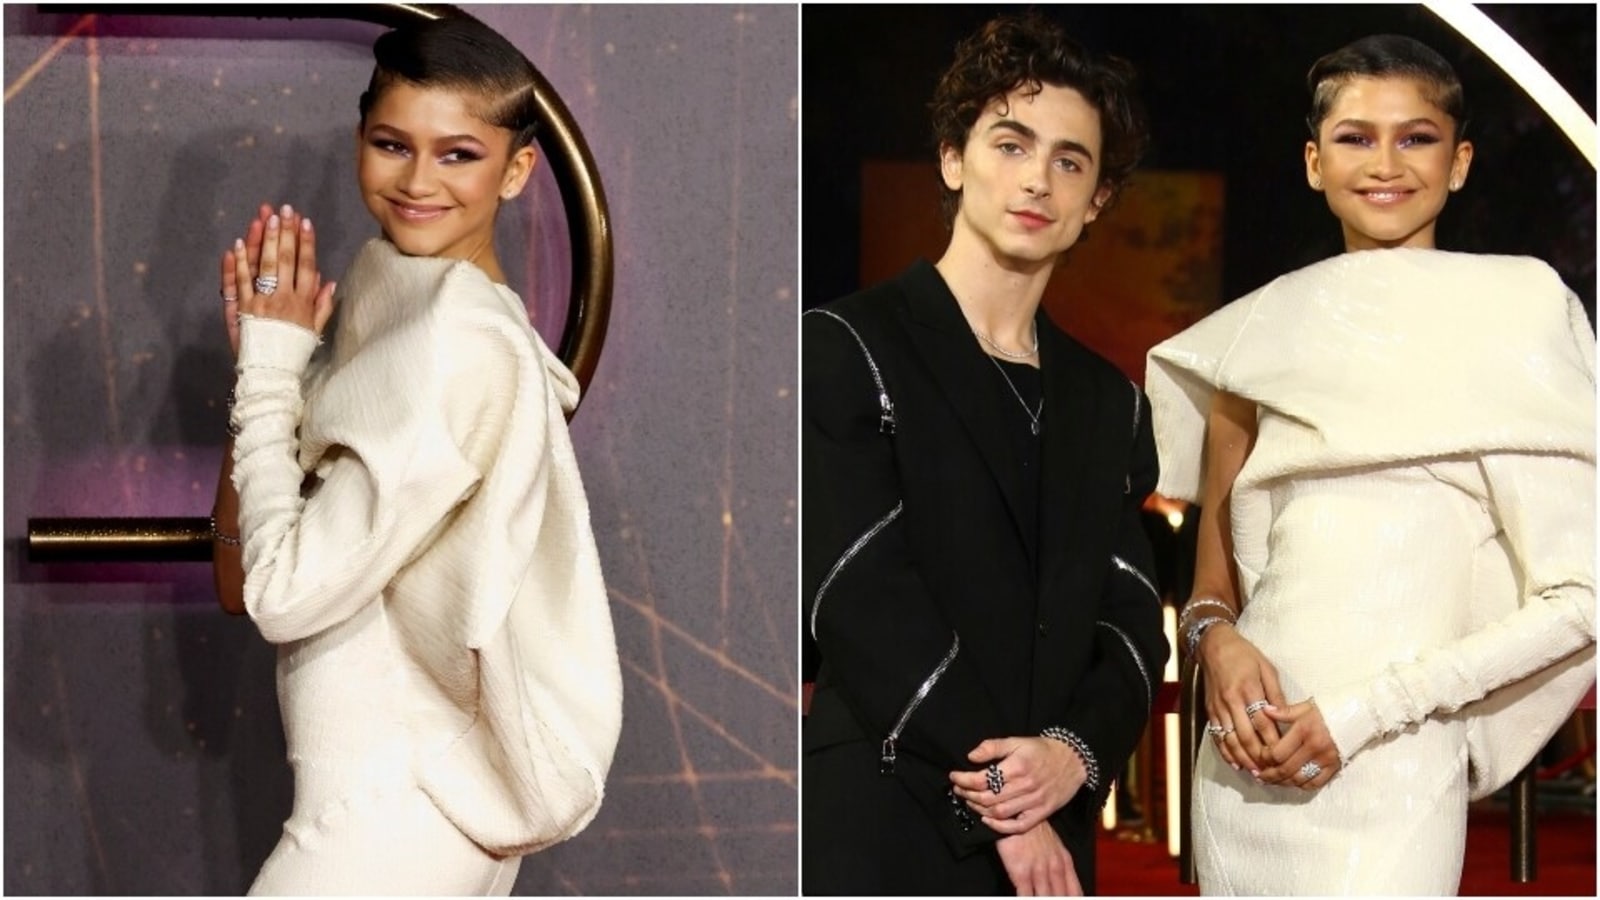 Zendaya & Timothee Chalamet Are Back With More Red Carpet Looks For 'Dune